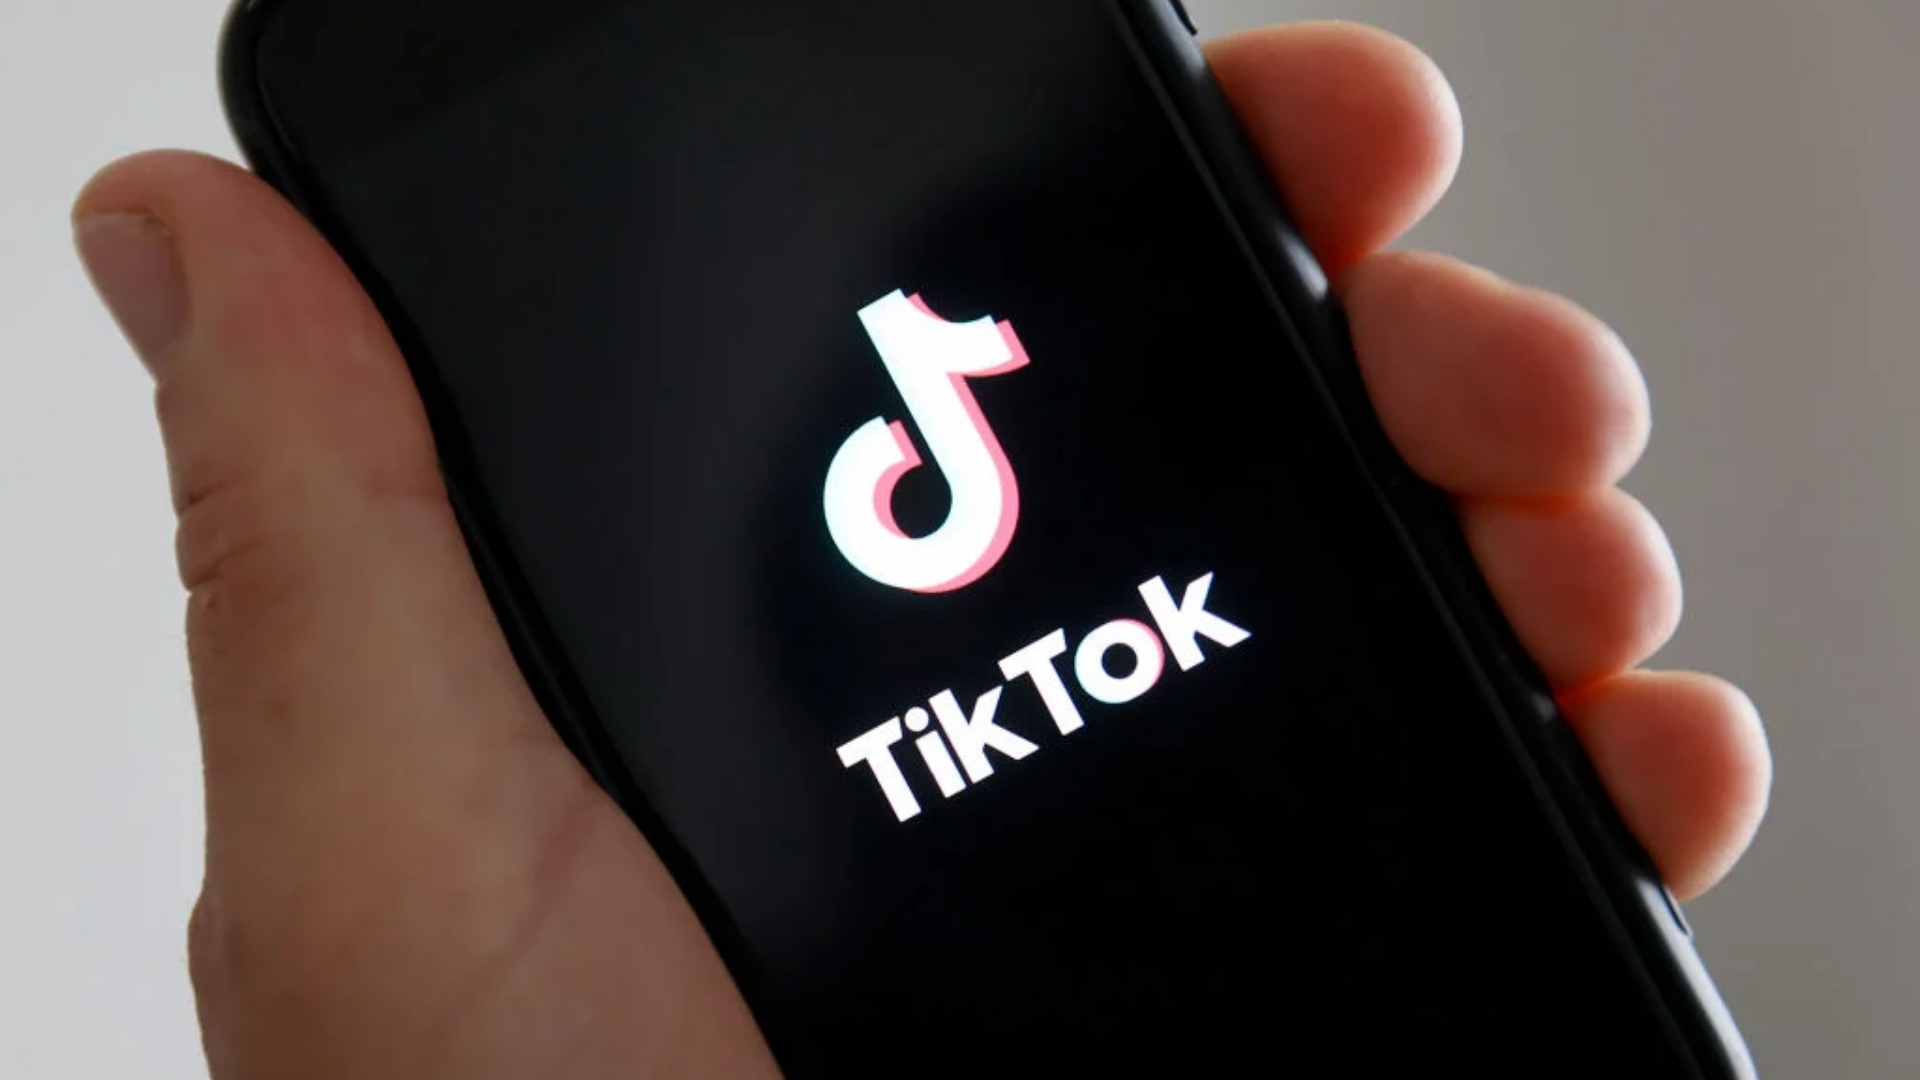 According to a report, ByteDance would prefer to close down TikTok than sell in the US.